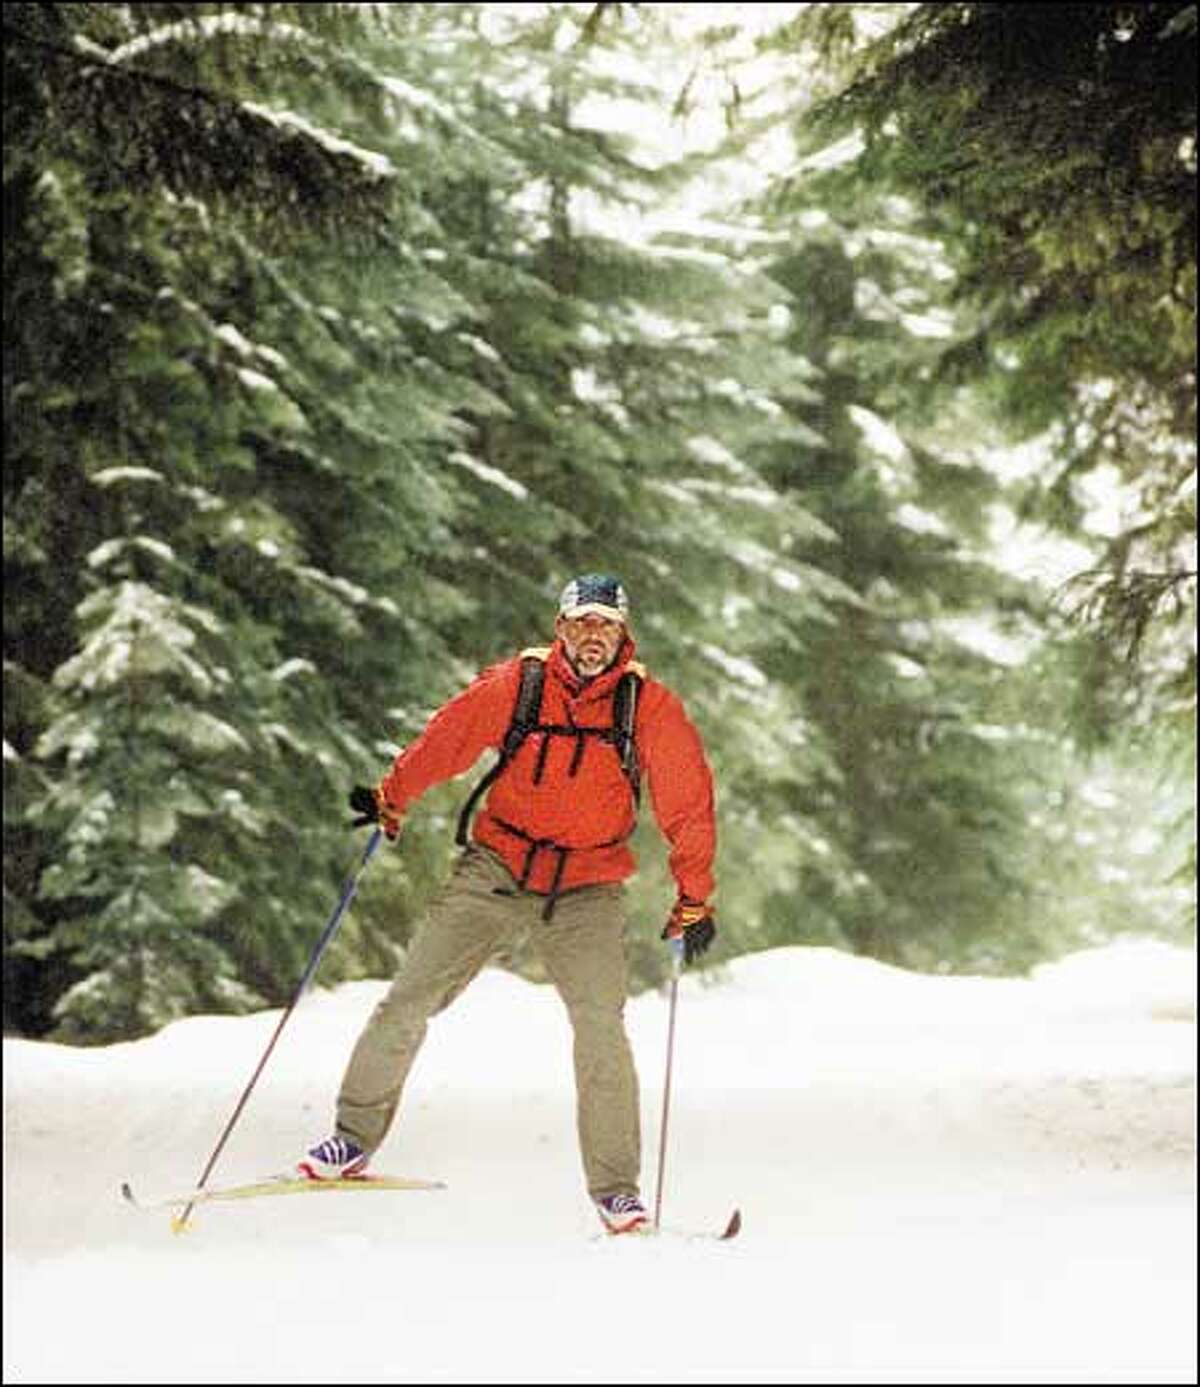 Carey Gersten uses a herringbone stride to work his way up a hill at Snoqualmie Pass.